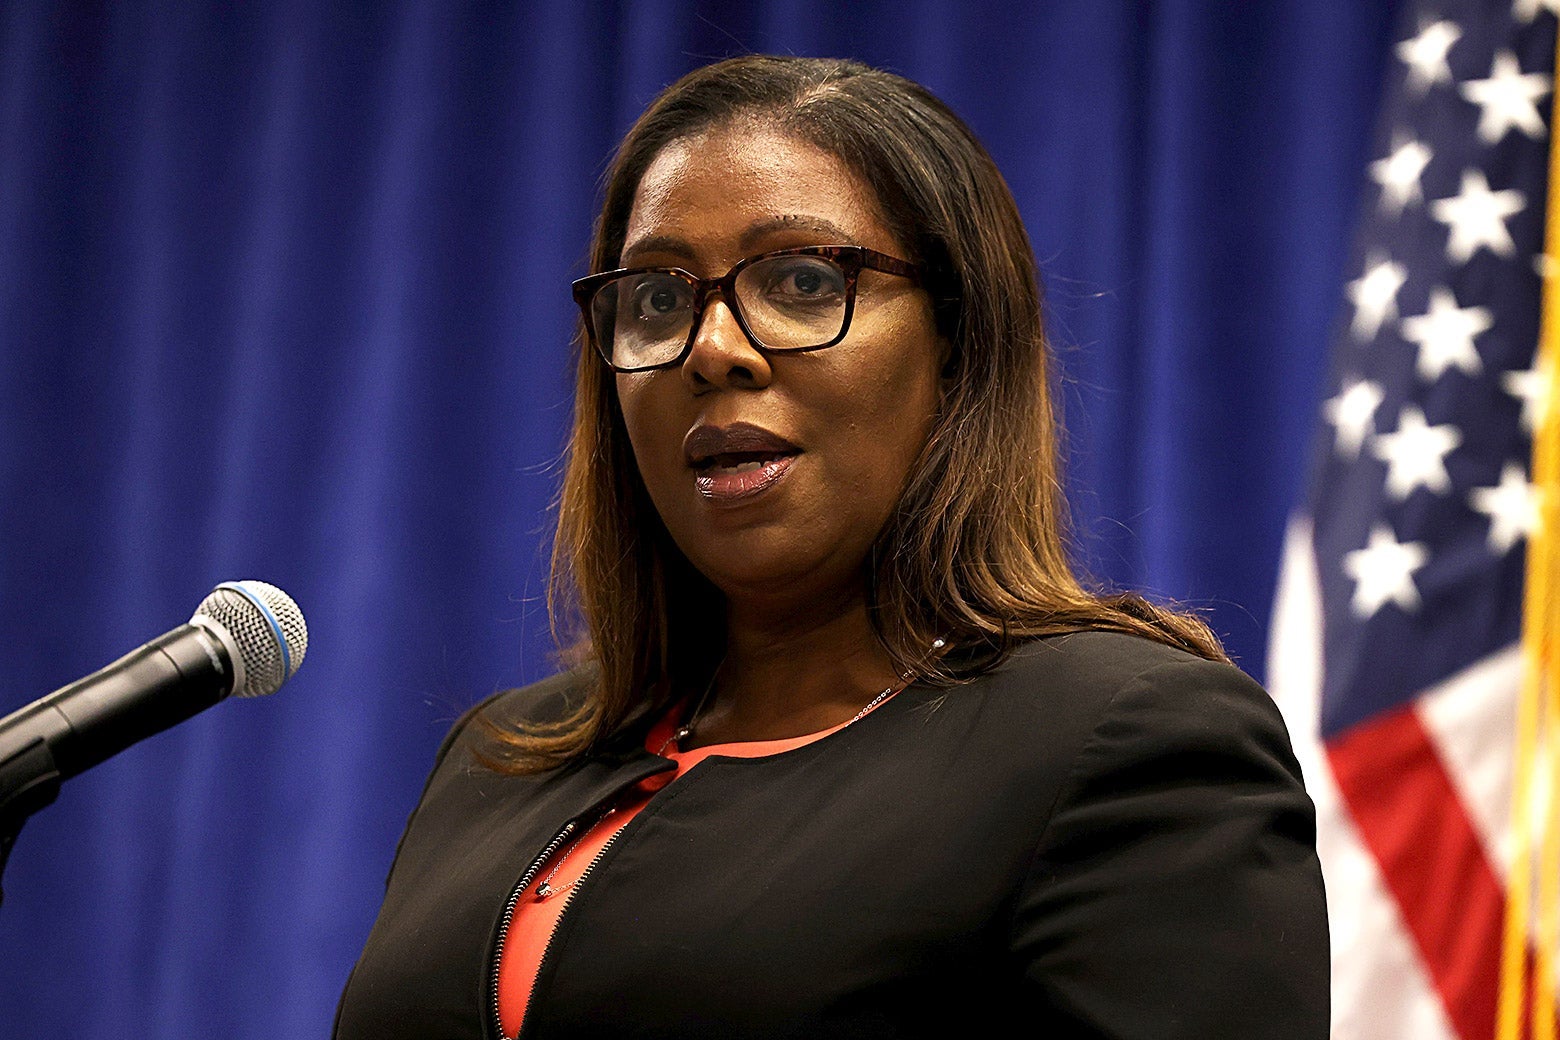 Letitia James speaks into a microphone with an American flag behind her.